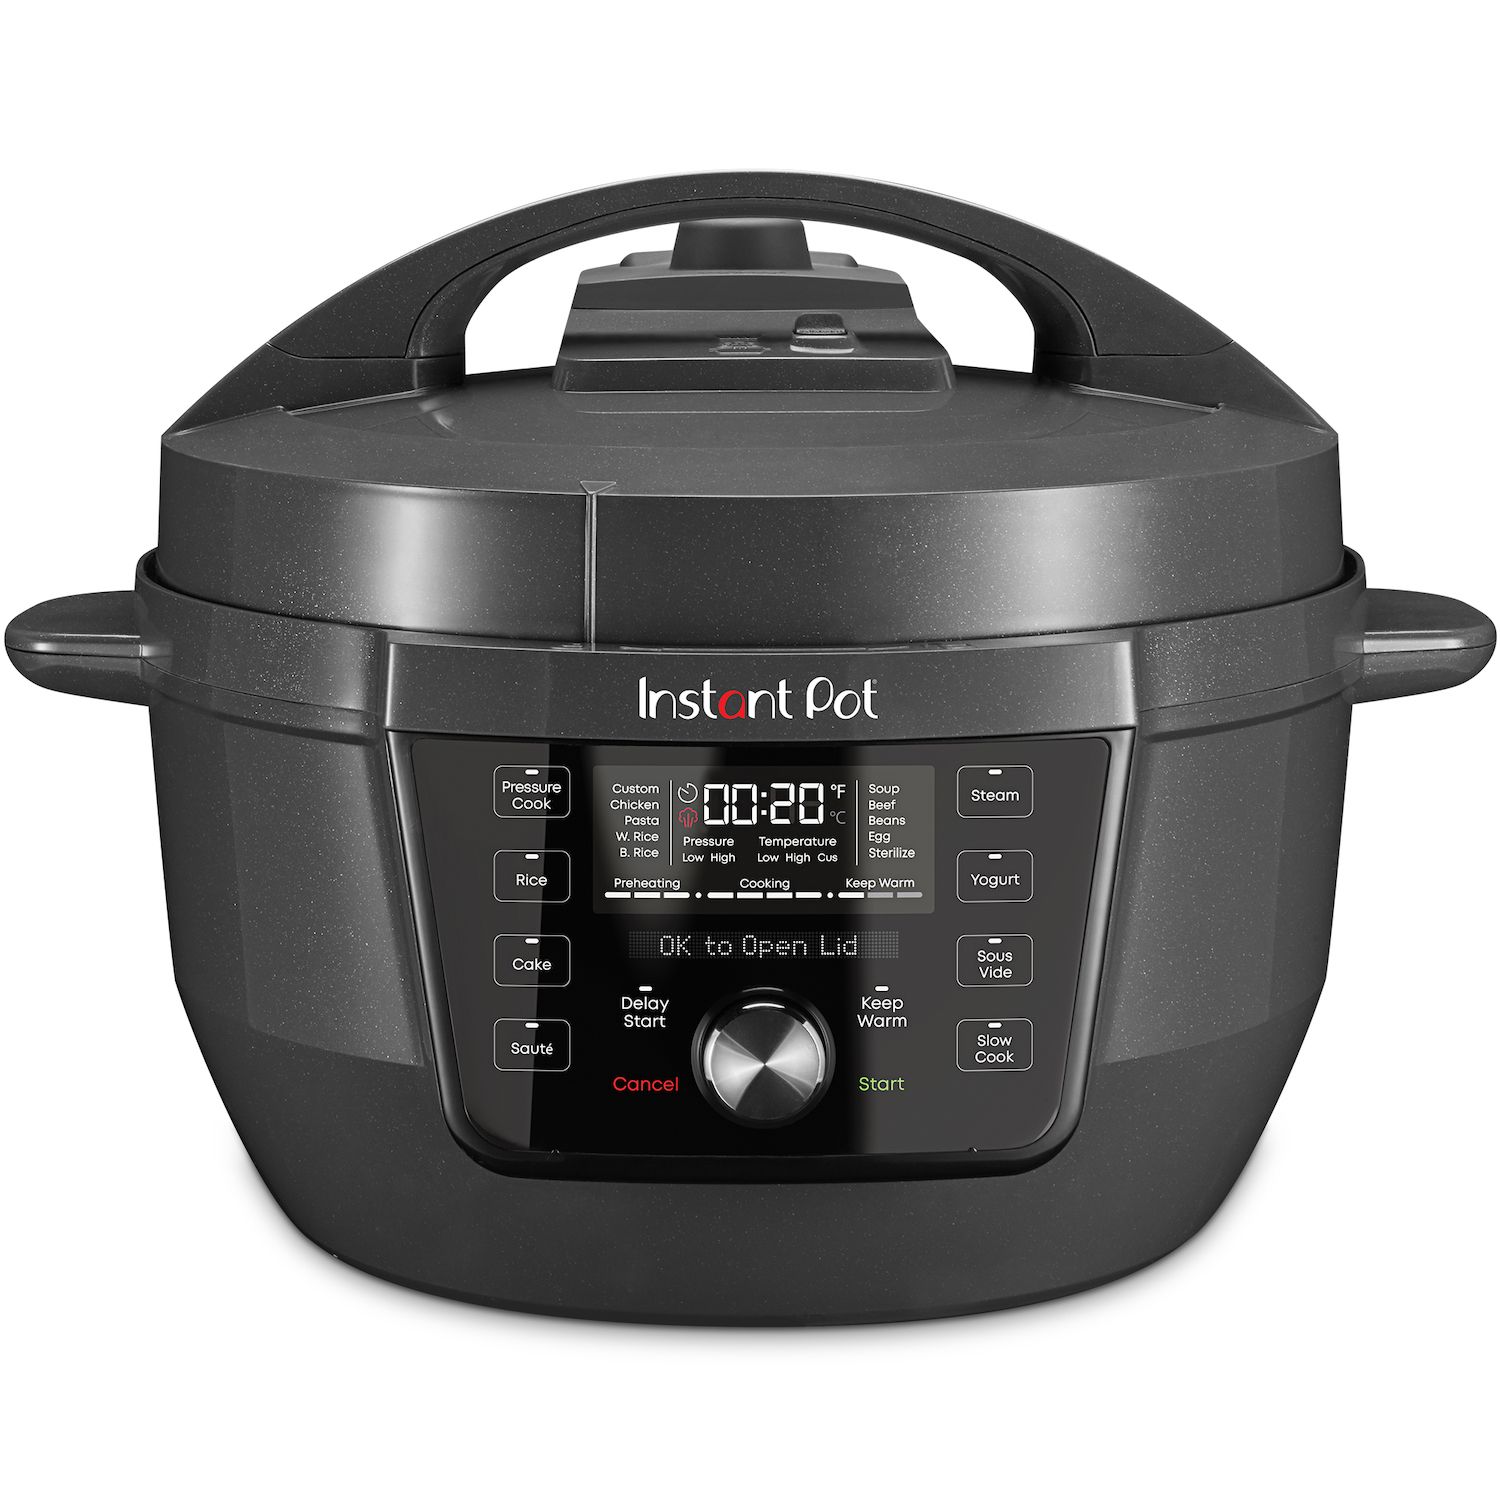 Instant Pot Omni Plus 11-in-1 Multi-Cooker Oven now 15% off at